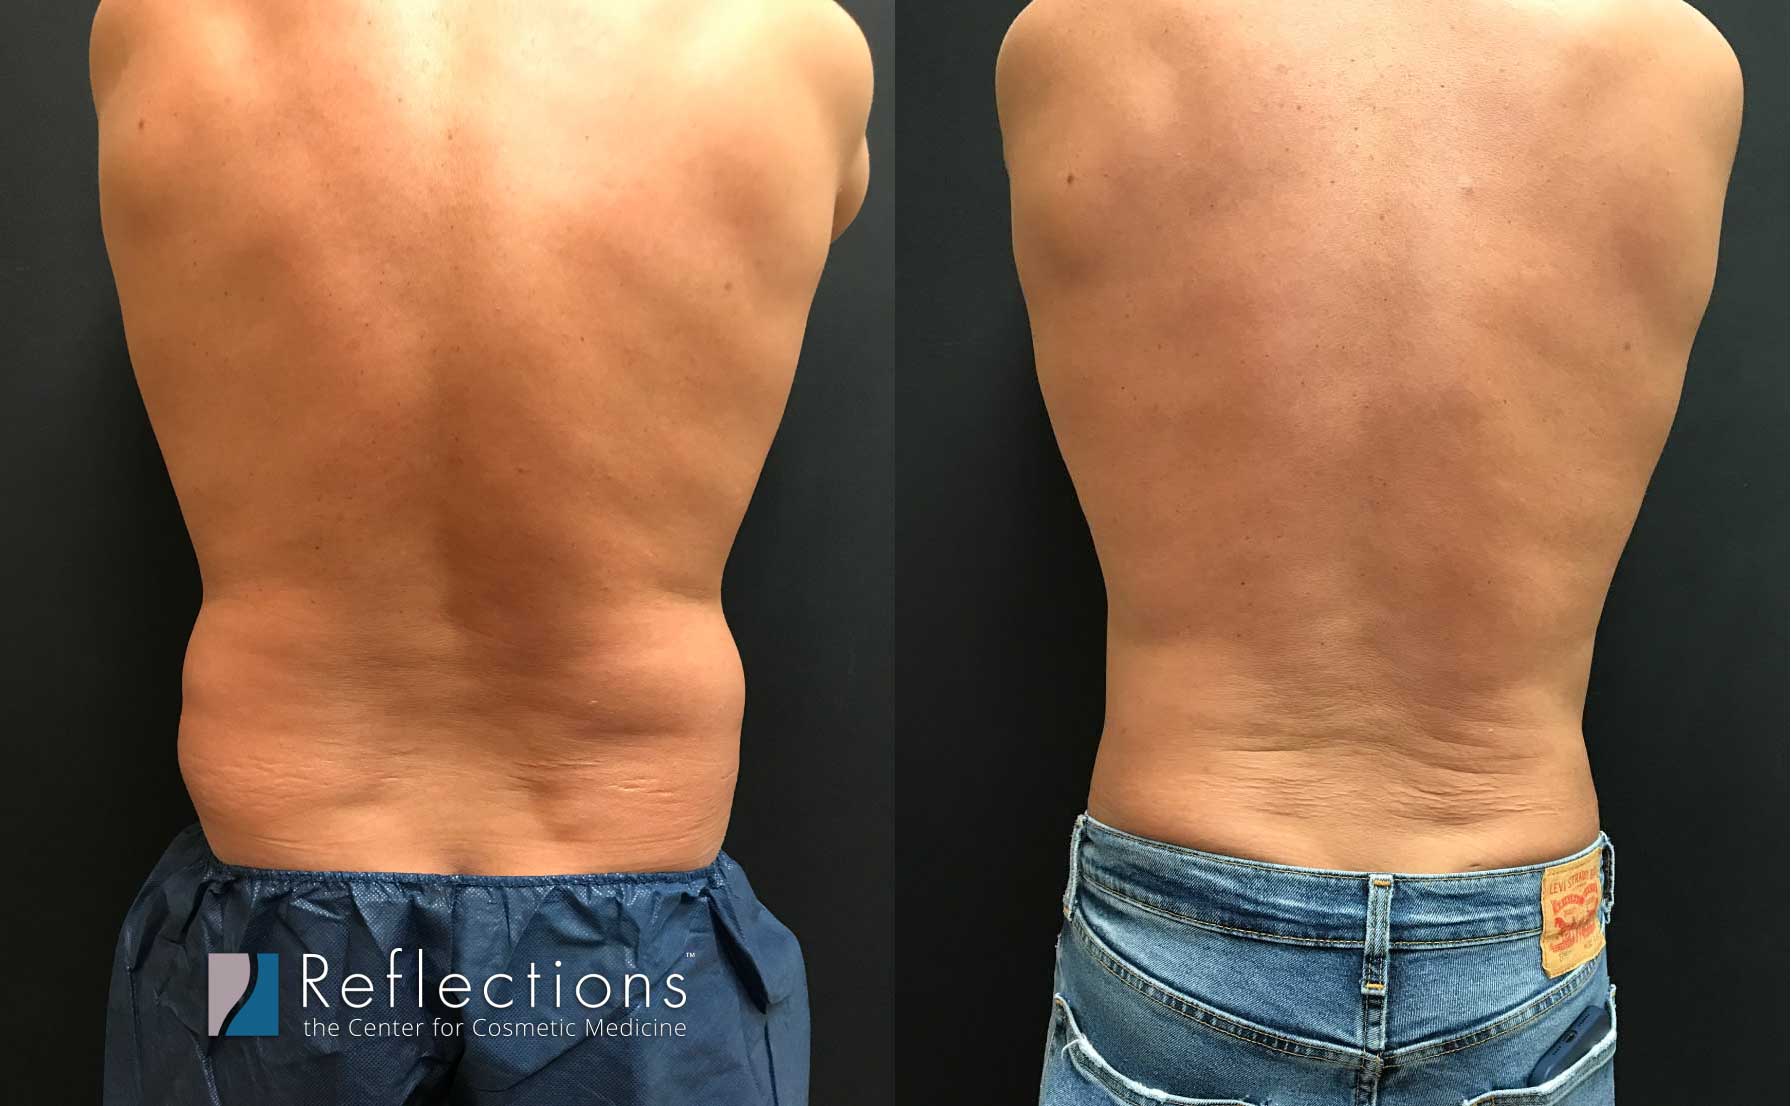 Male Lipo To Get Rid Of Love Handles Without Anesthesia Or Long